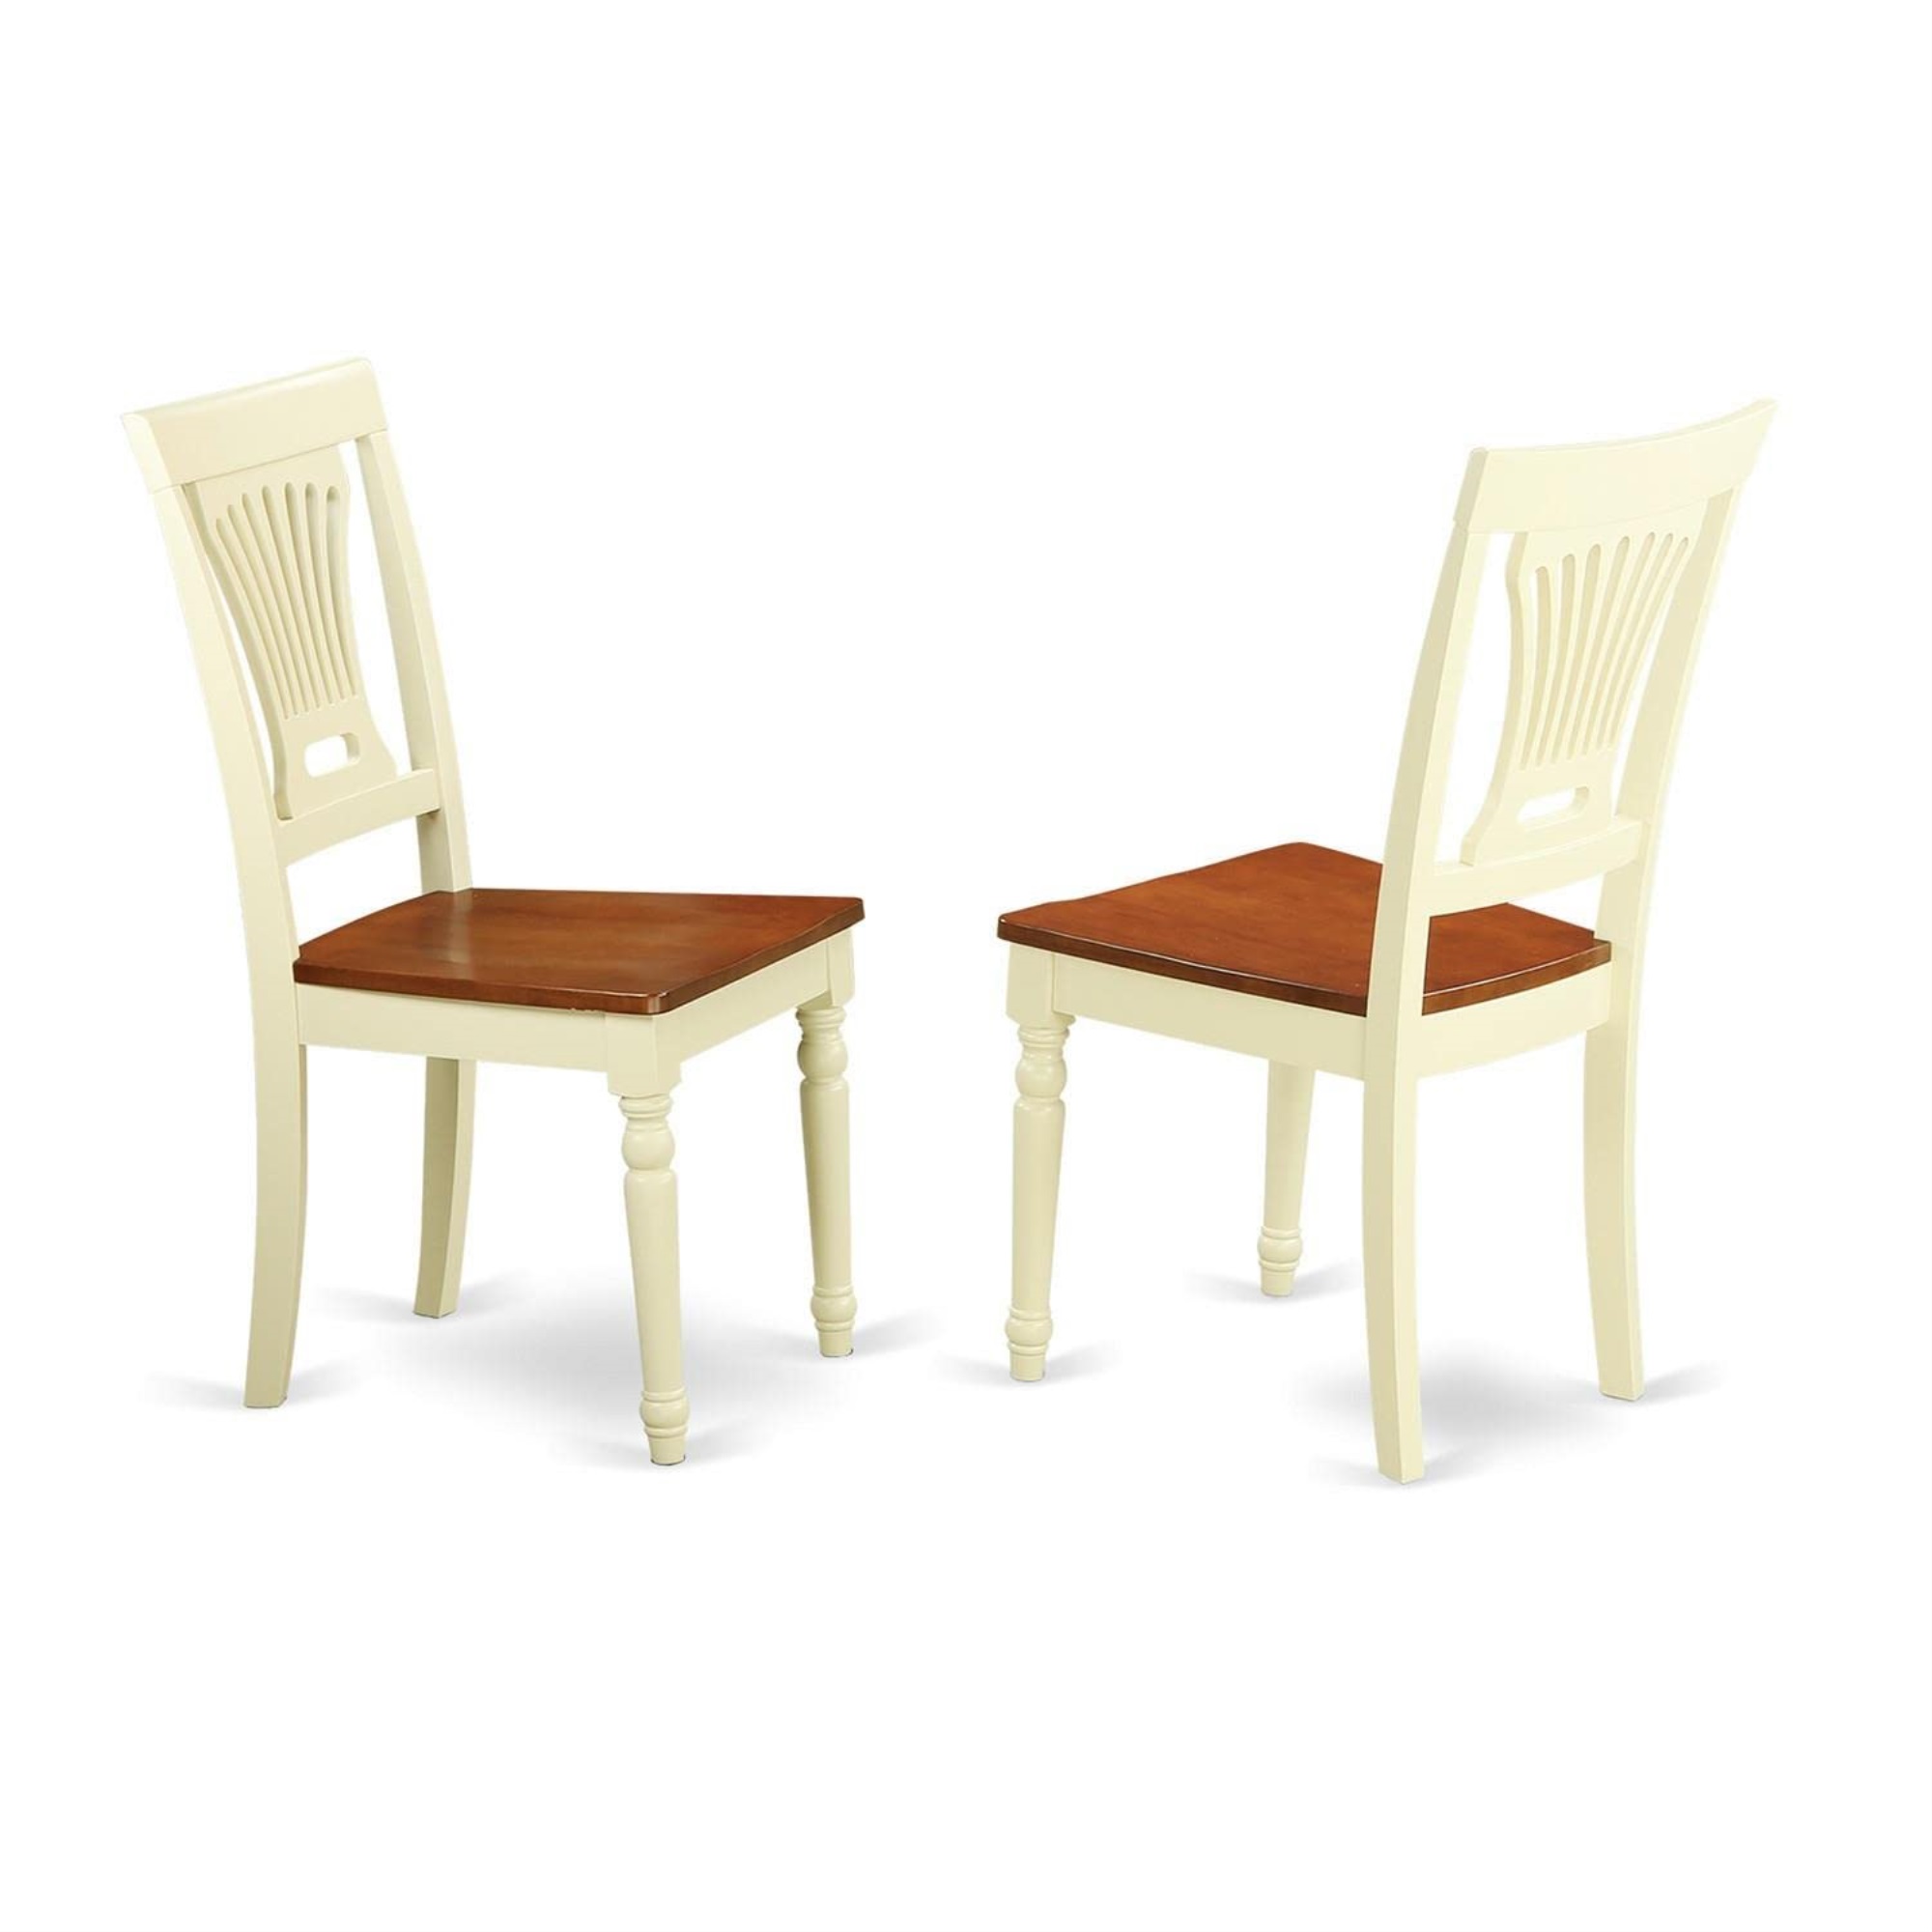 East West Furniture Set of 2 Chairs PVC-WHI-W Plainville Kitchen dining Chair Wood Seat - Buttermilk and Cherry Finish